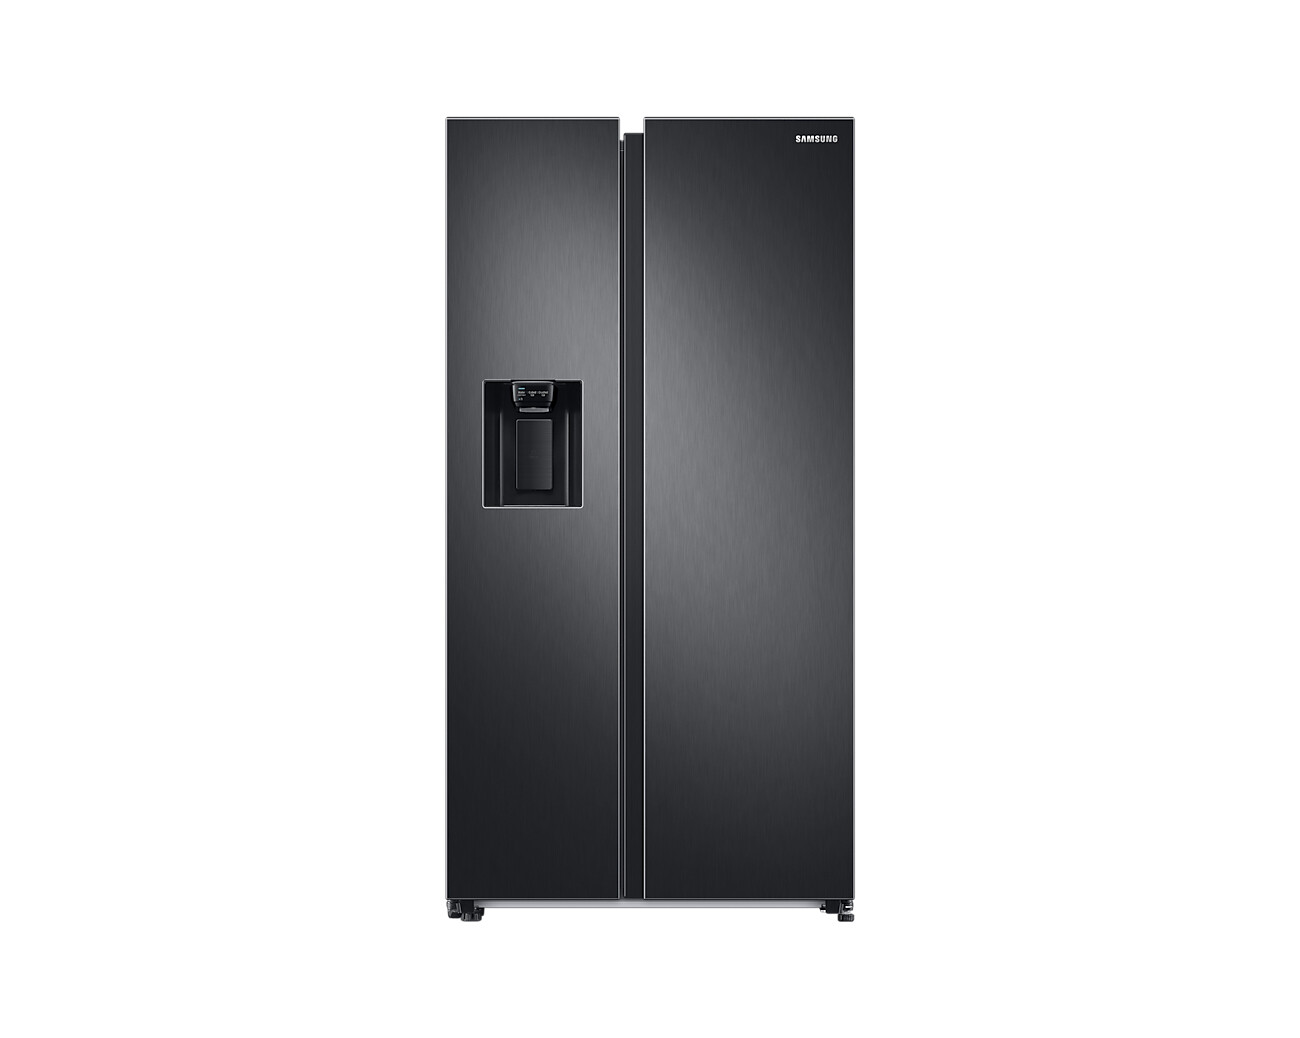 Samsung Series 8 RS68A884CB1 Plumbed Frost Free American Fridge Freezer – Black – C Rated #365450